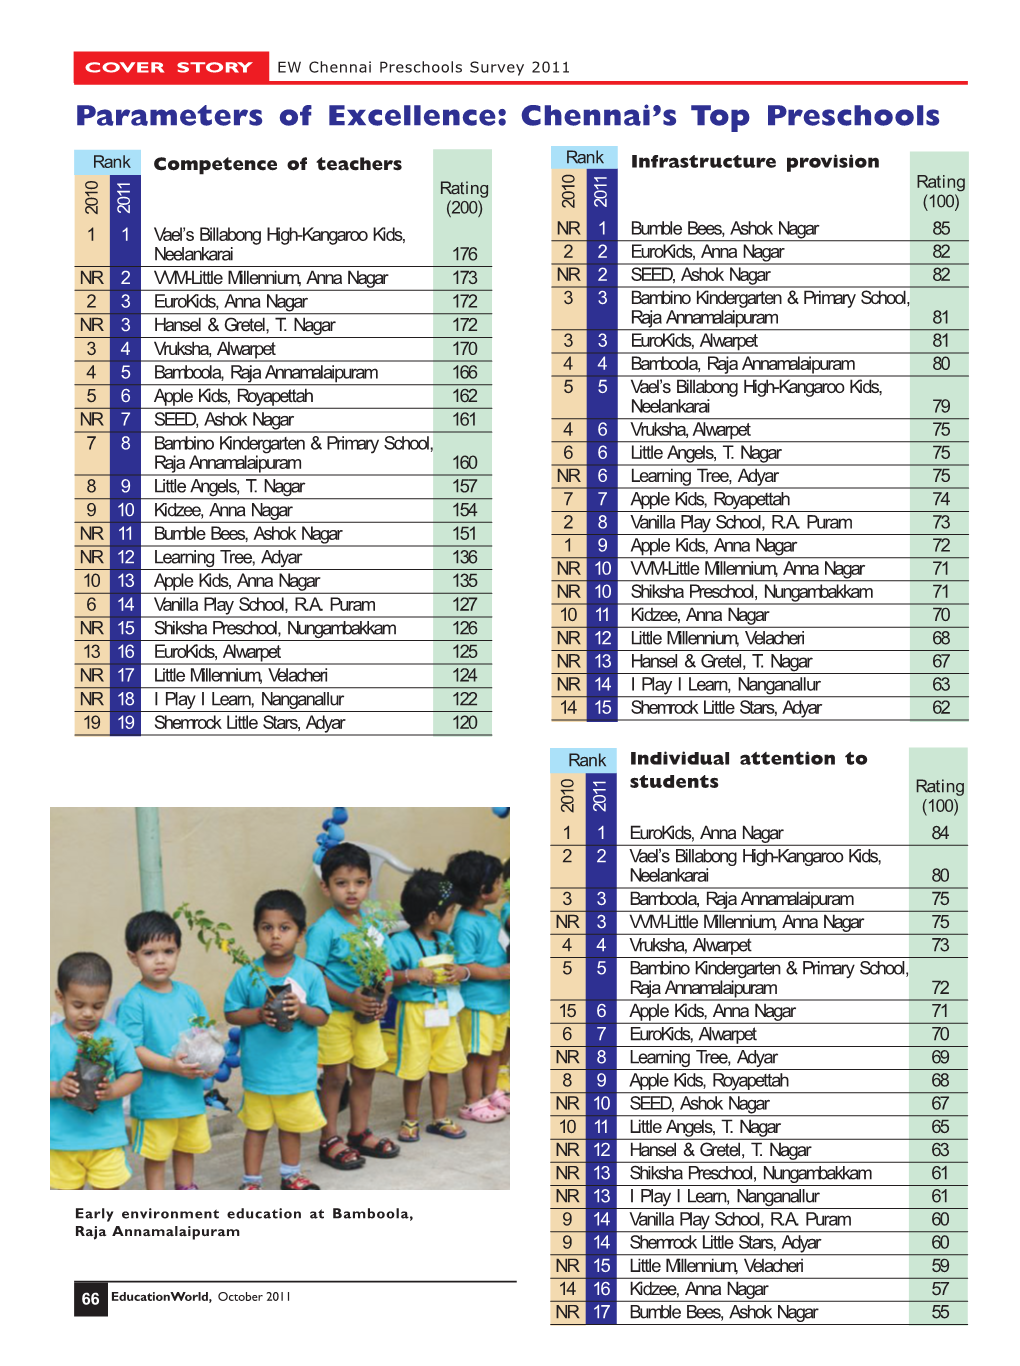 Parameters of Excellence: Chennai's Top Preschools